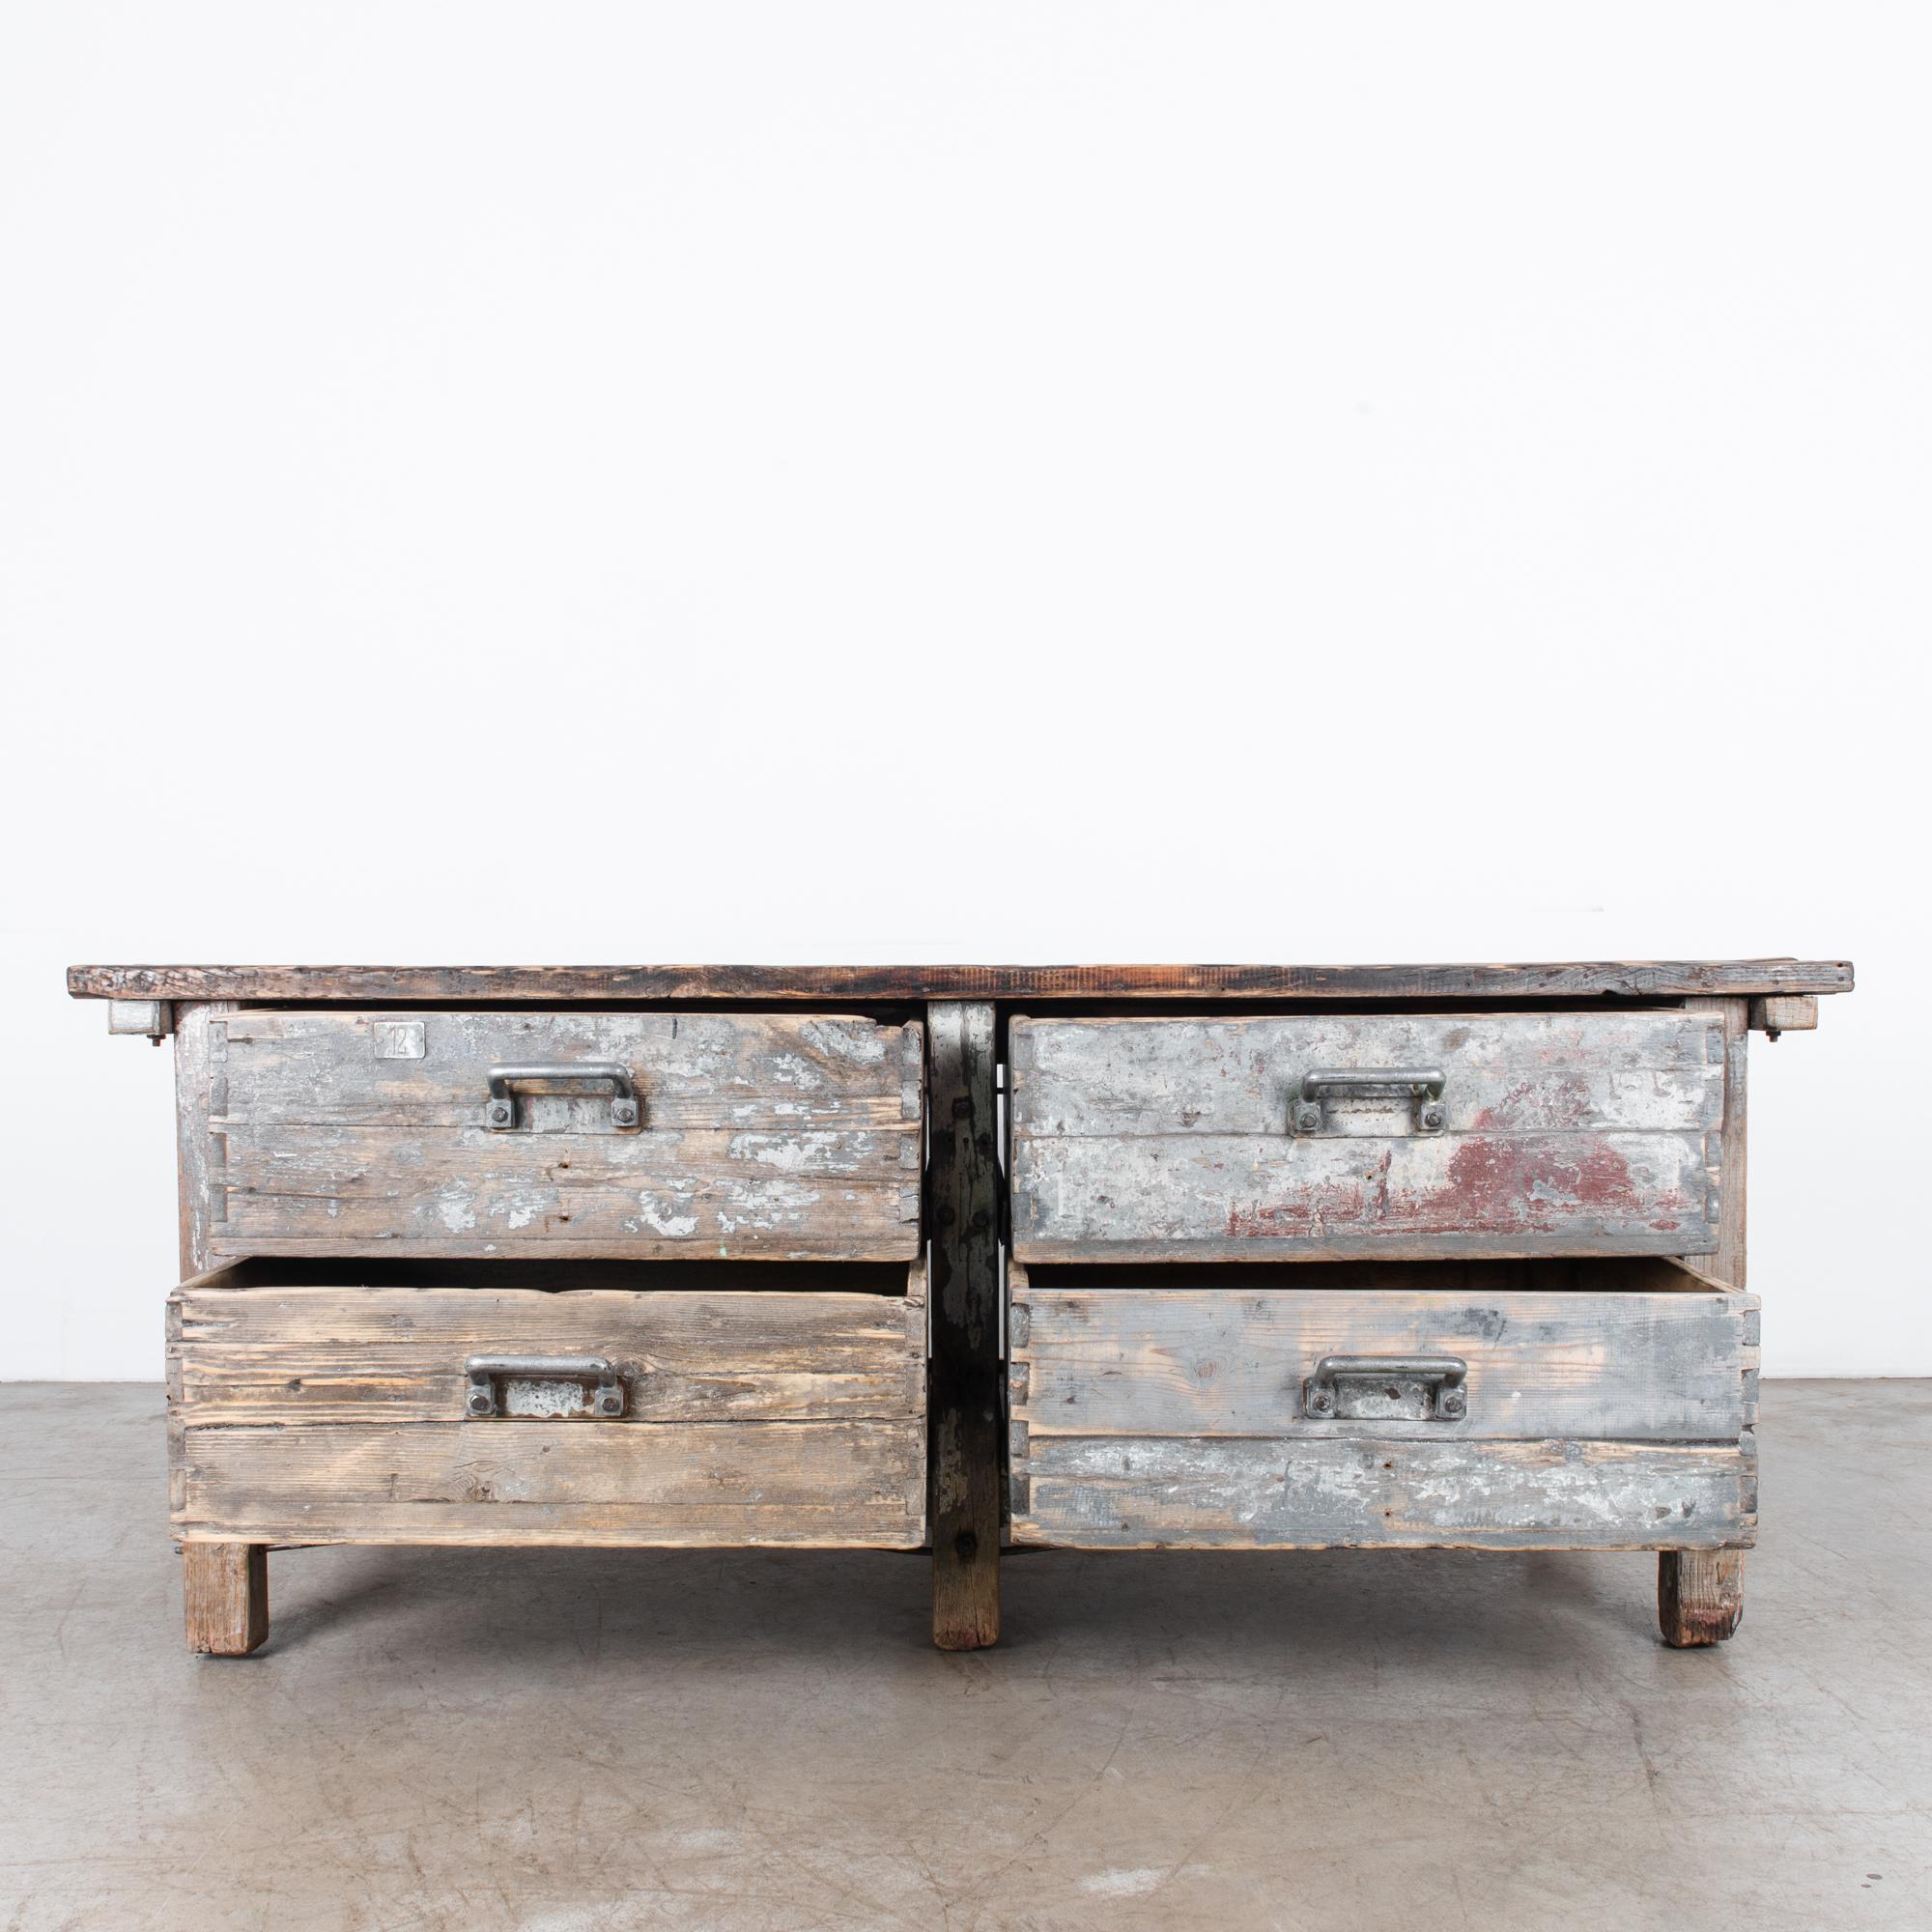 Great character, patina shows the age and history of the piece. A mix of sturdy handcut wooden elements, aluminium and steel hardware. Hefty proportions and simple form make this piece a great fit for chic modern, rustic or anything in between. Note